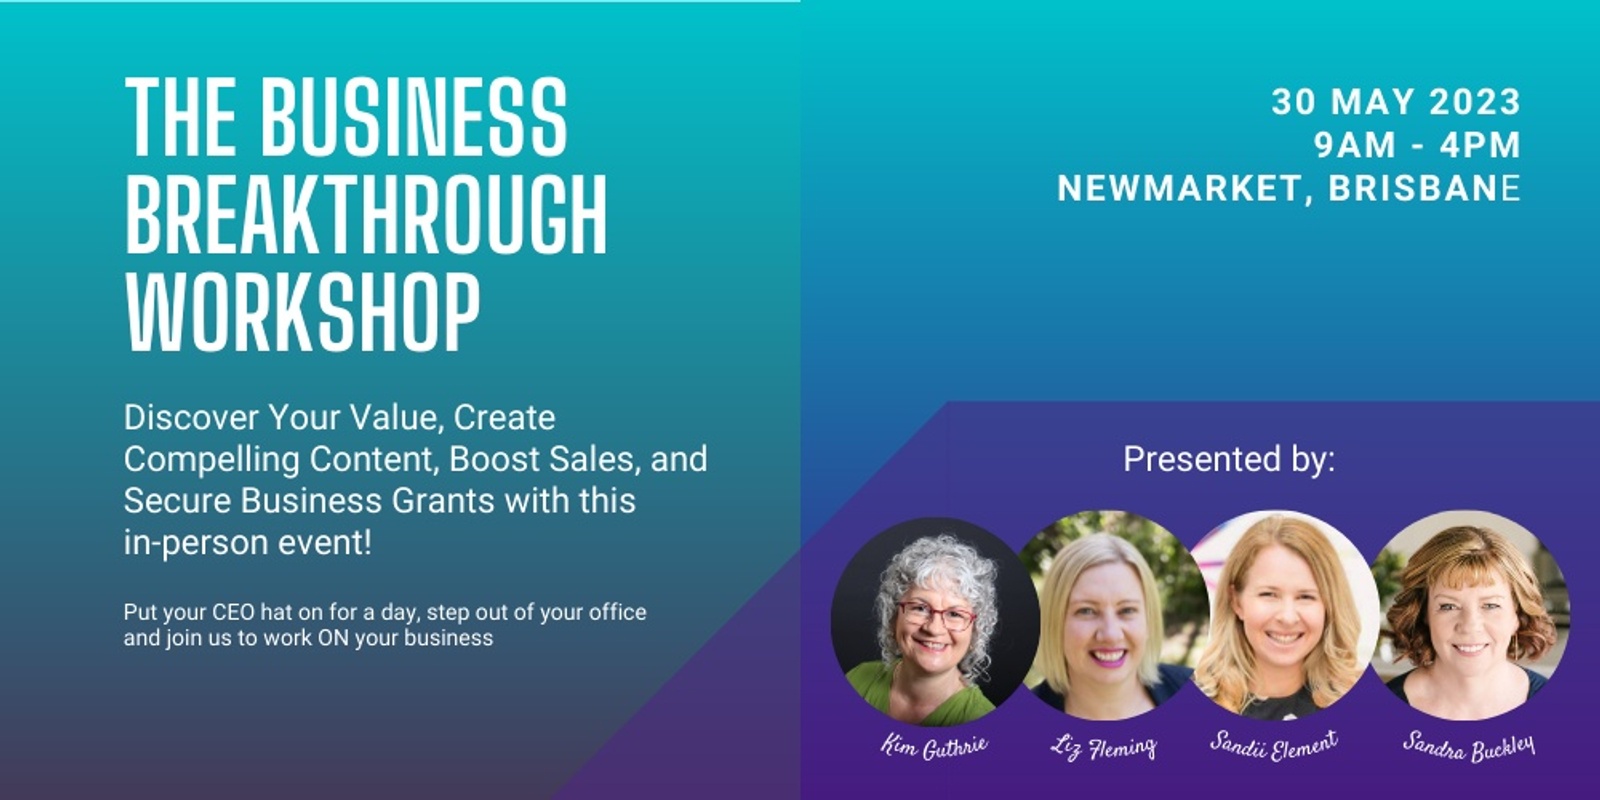 Banner image for The Business Breakthrough Workshop: Discover Your Value, Create Compelling Content, Boost Sales, and Secure Business Grants.